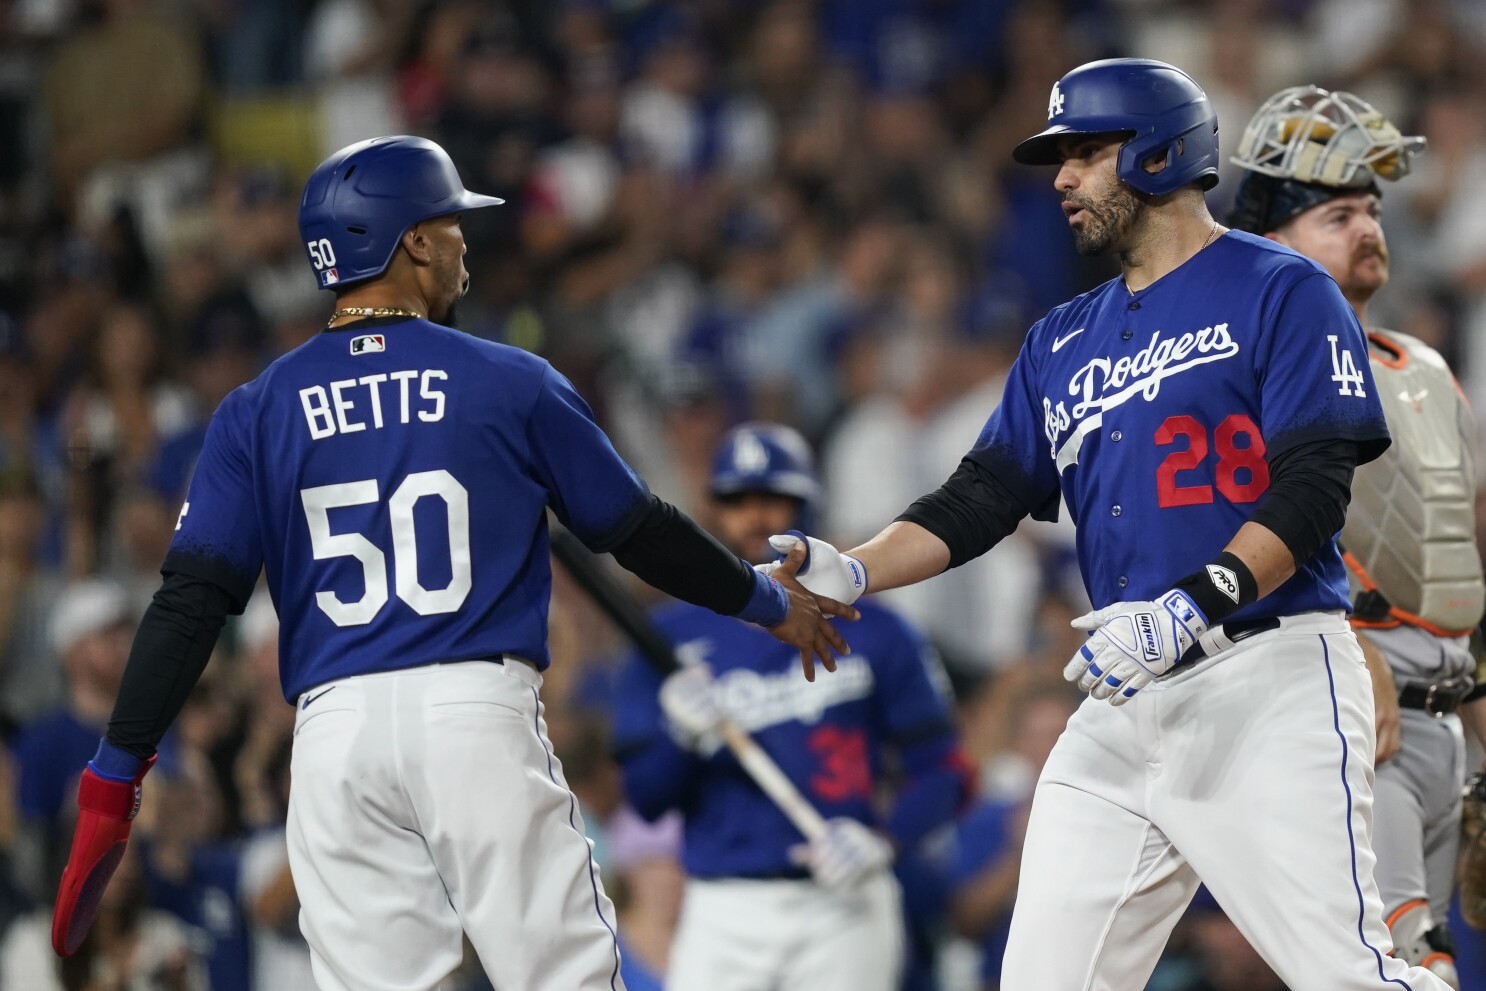 Martinez hits 2 home runs as NL West champion Dodgers roll past